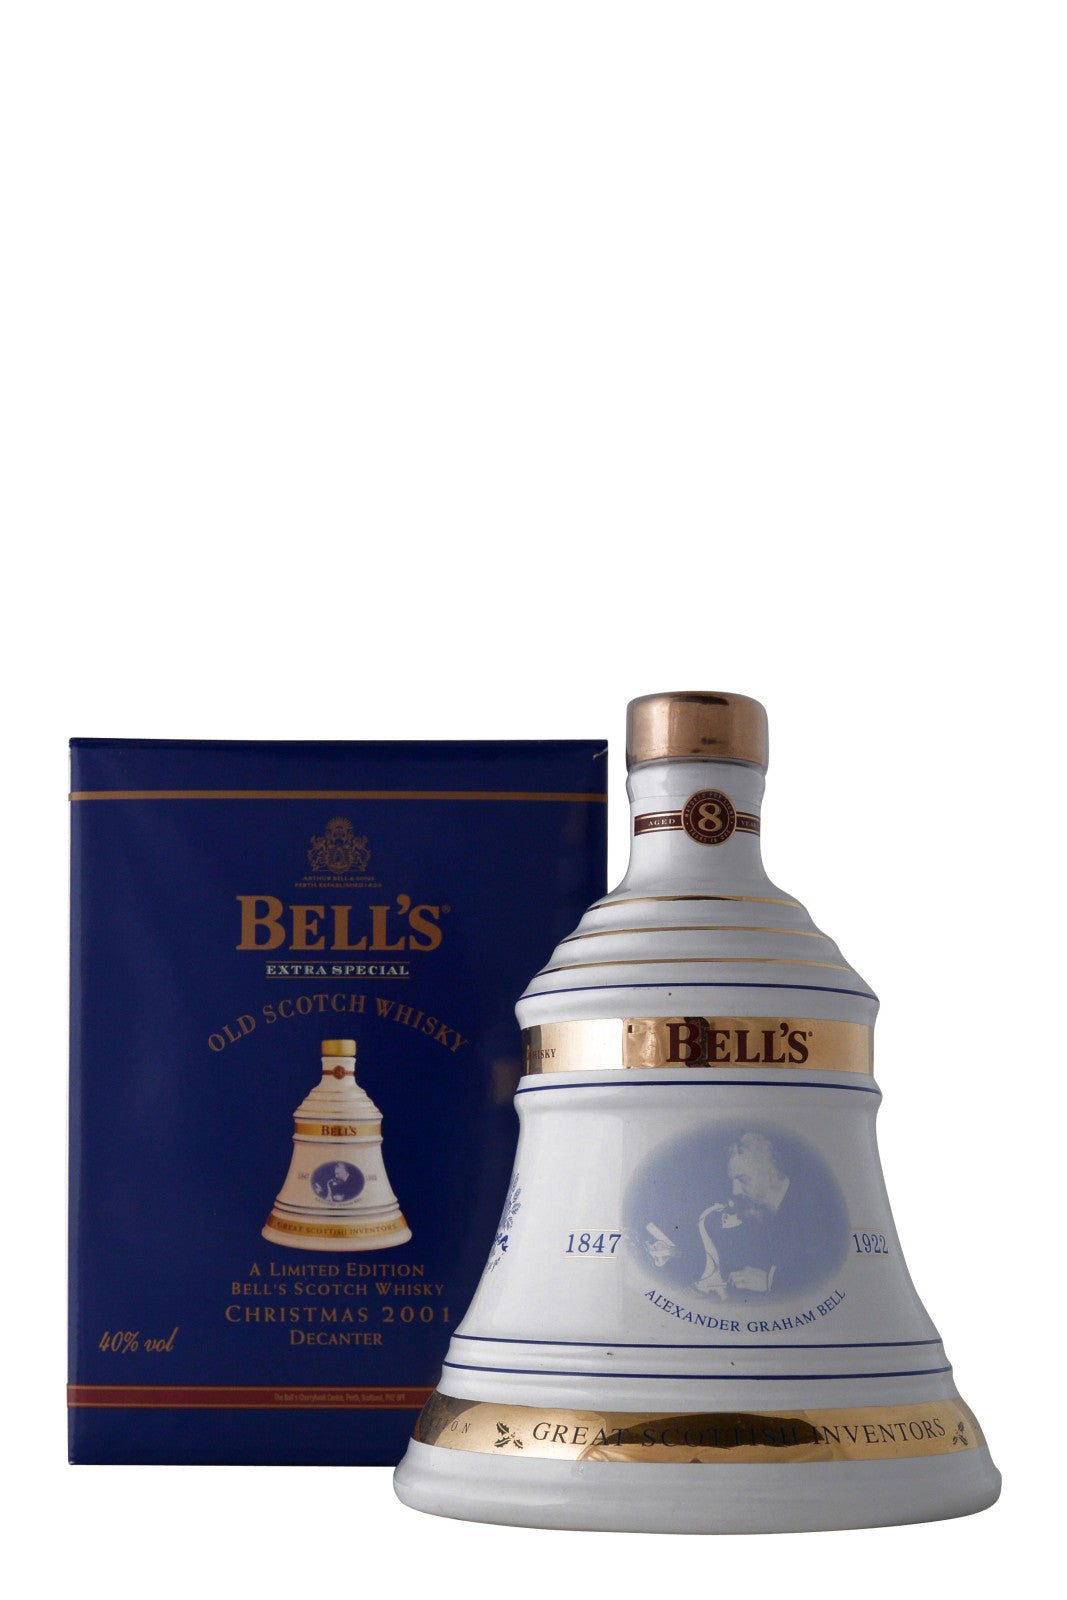 Bell's Christmas Decanter 2001